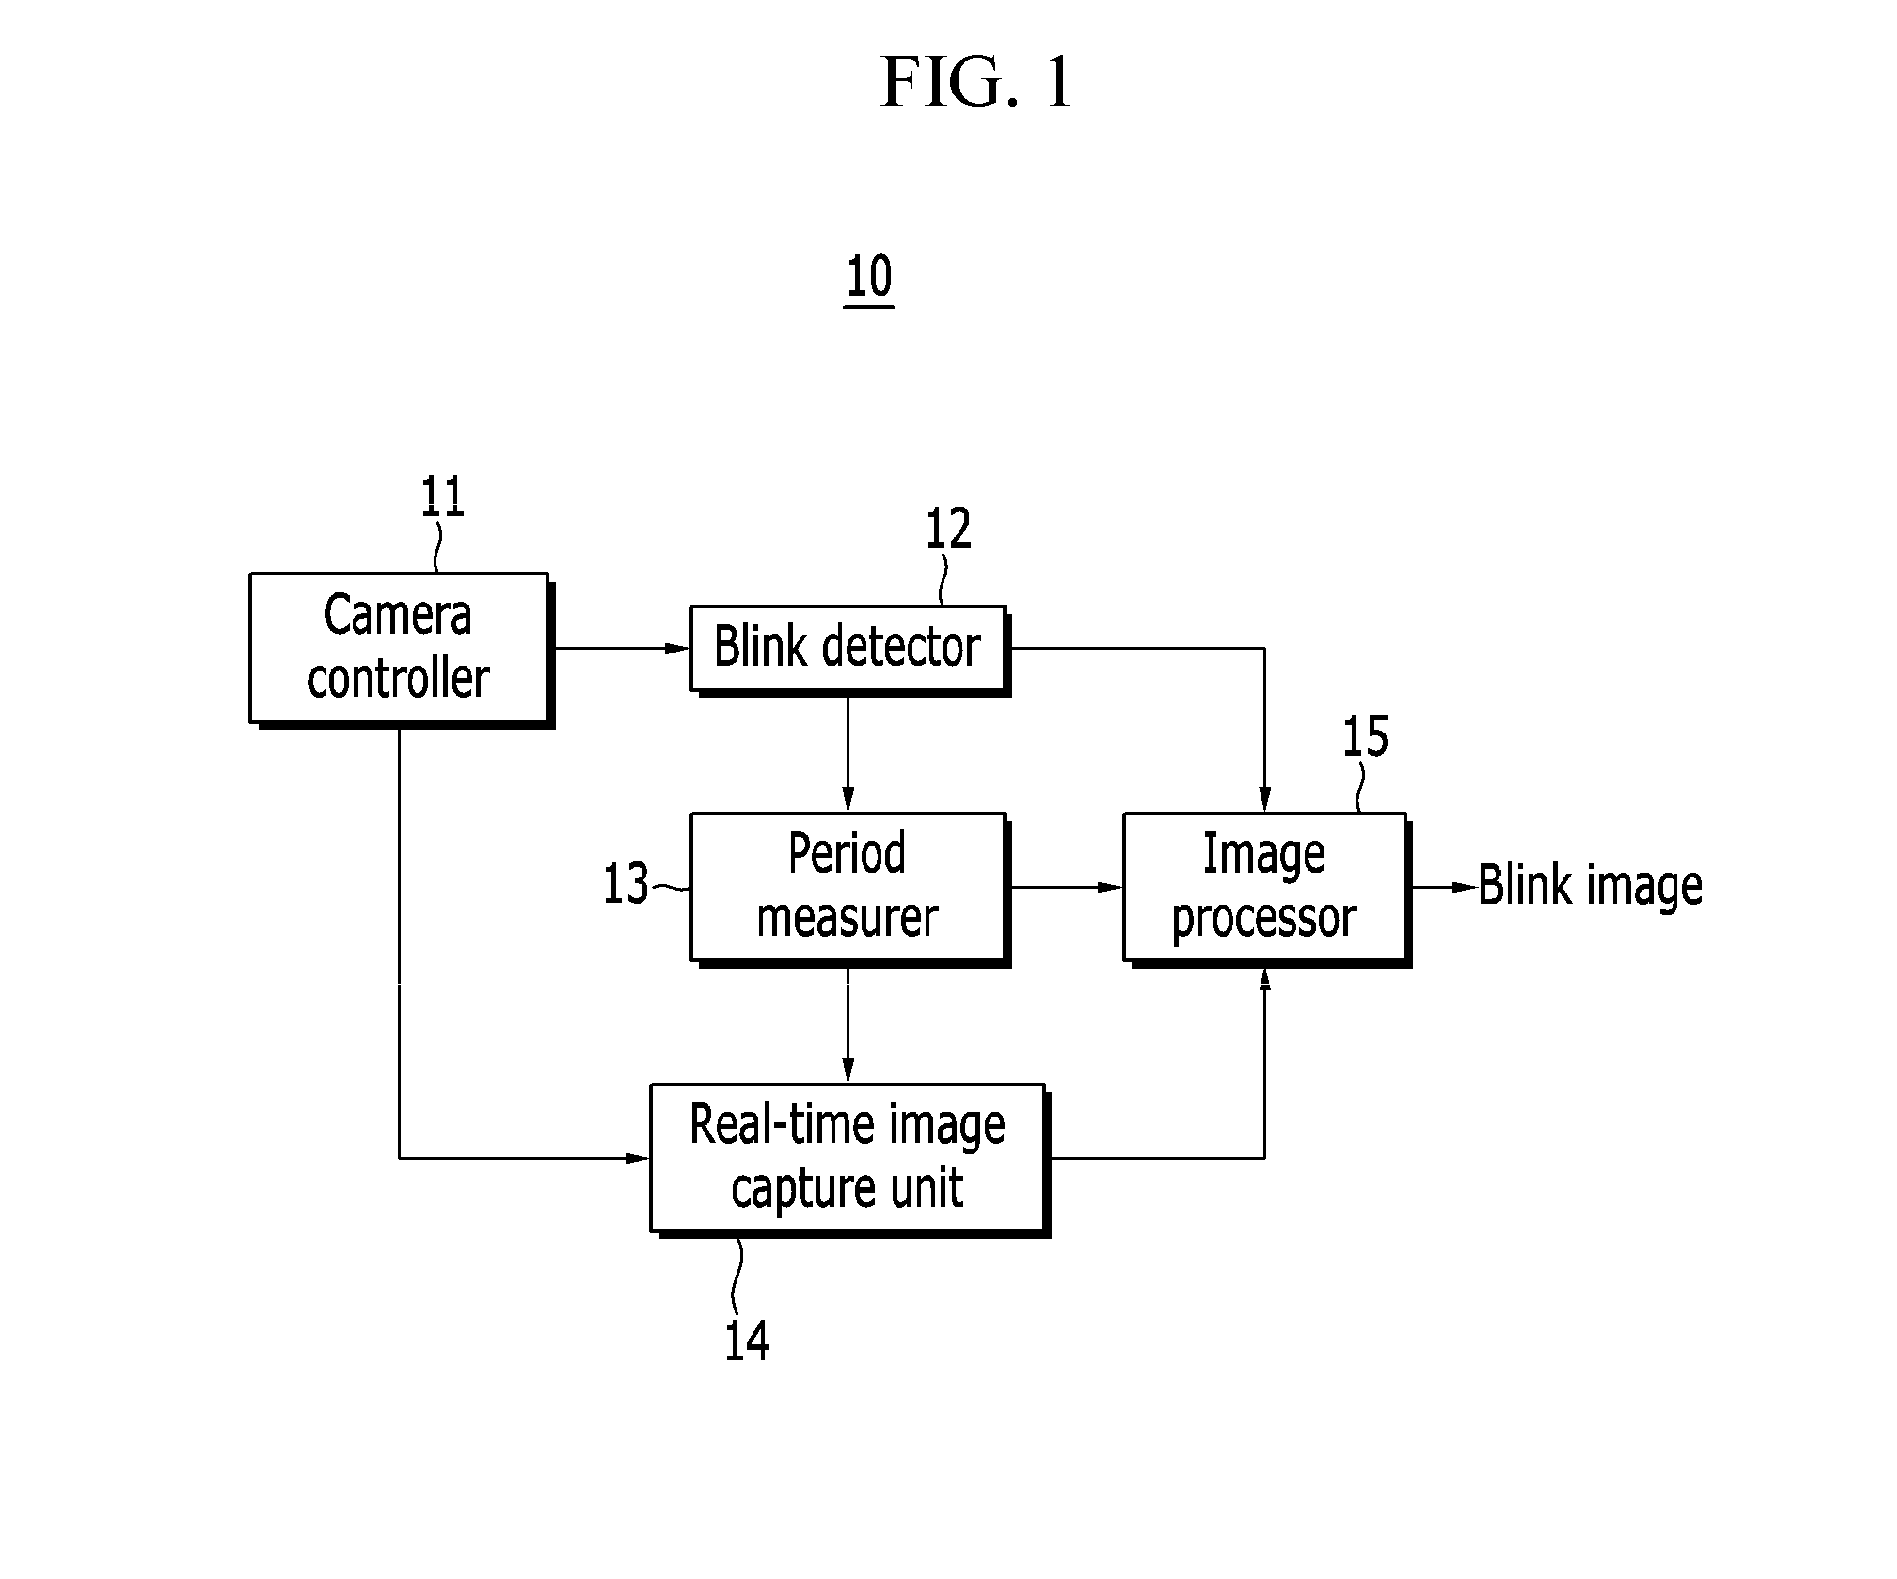 System and method of inducing user eye blink